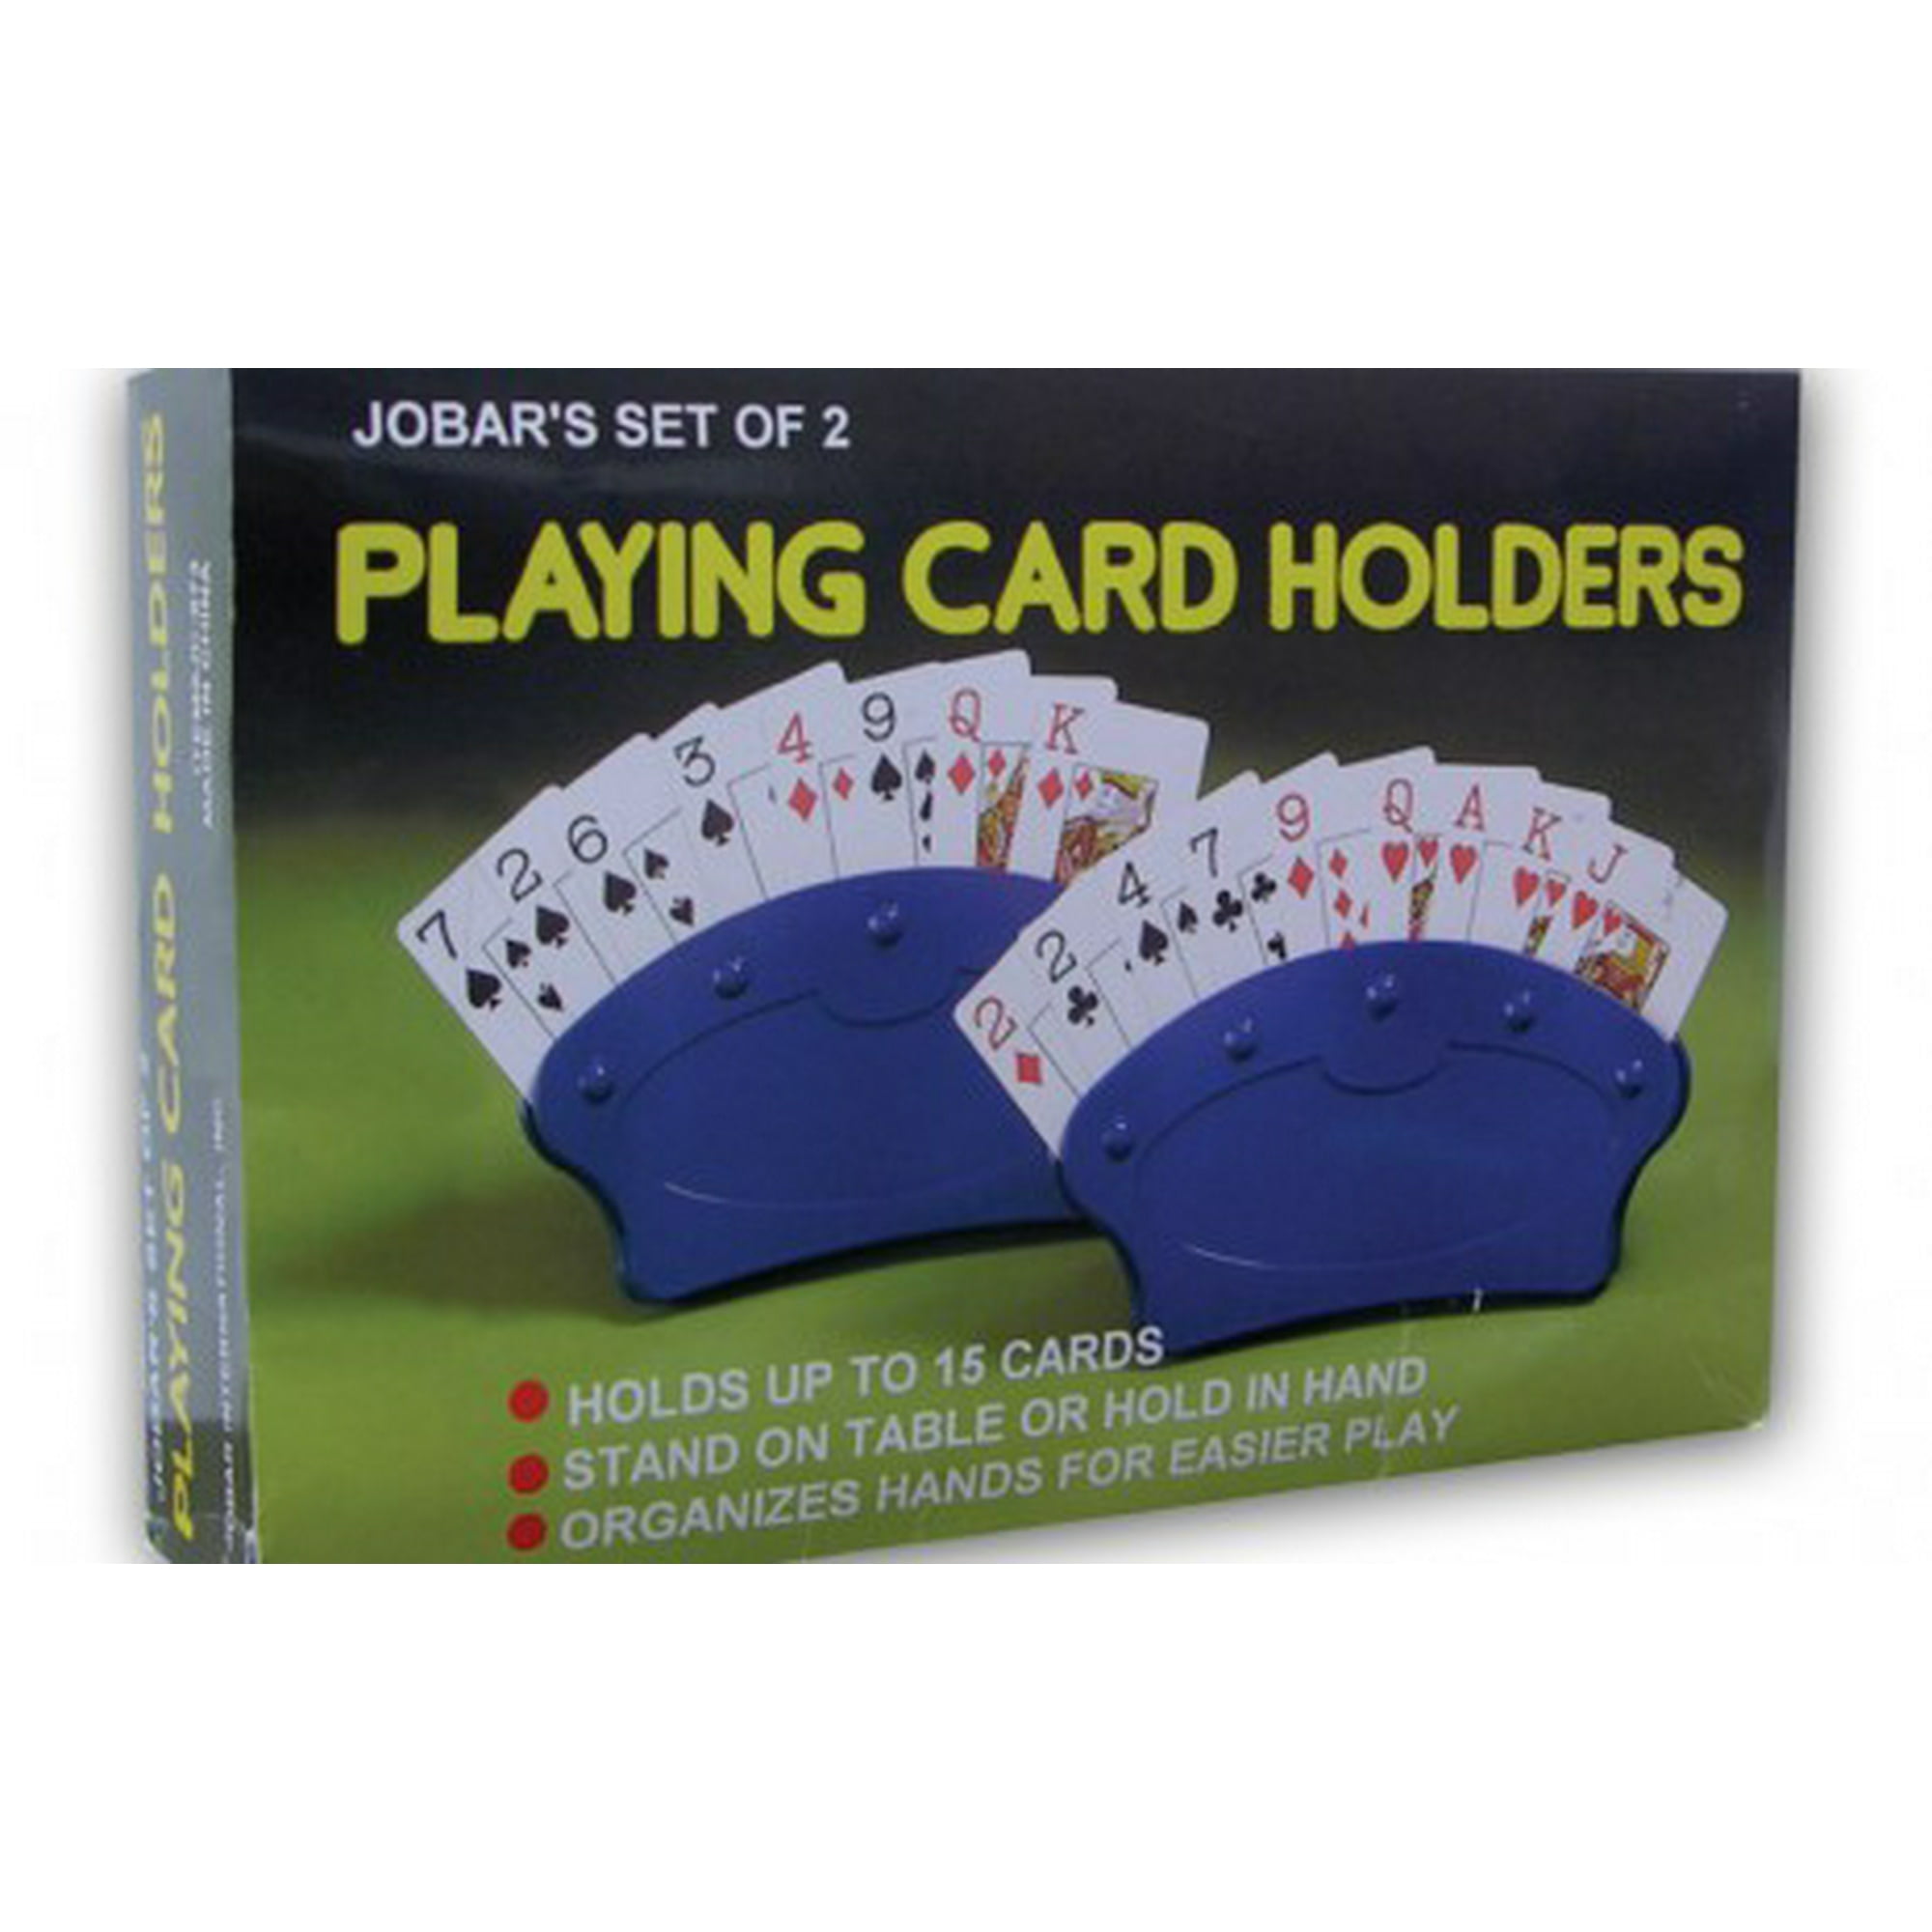 Jobar Hands-Free Playing Card Holders, Pack of 2